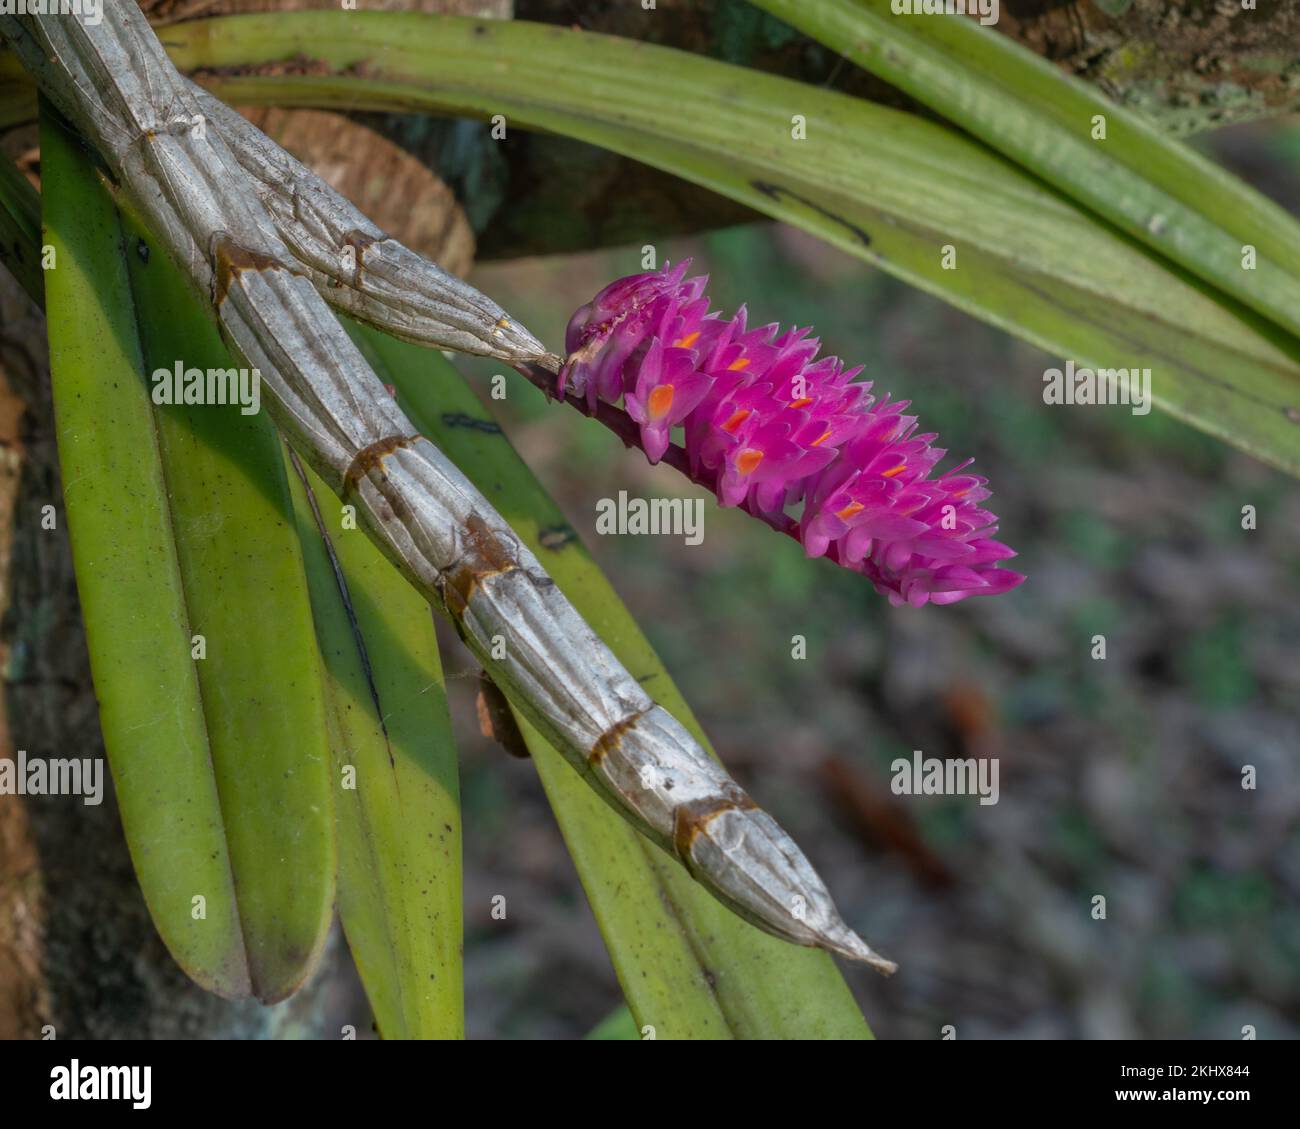 Closeup view of bright pink and orange flowers of epiphytic orchid species dendrobium secundum aka toothbrush orchid blooming on natural background Stock Photo